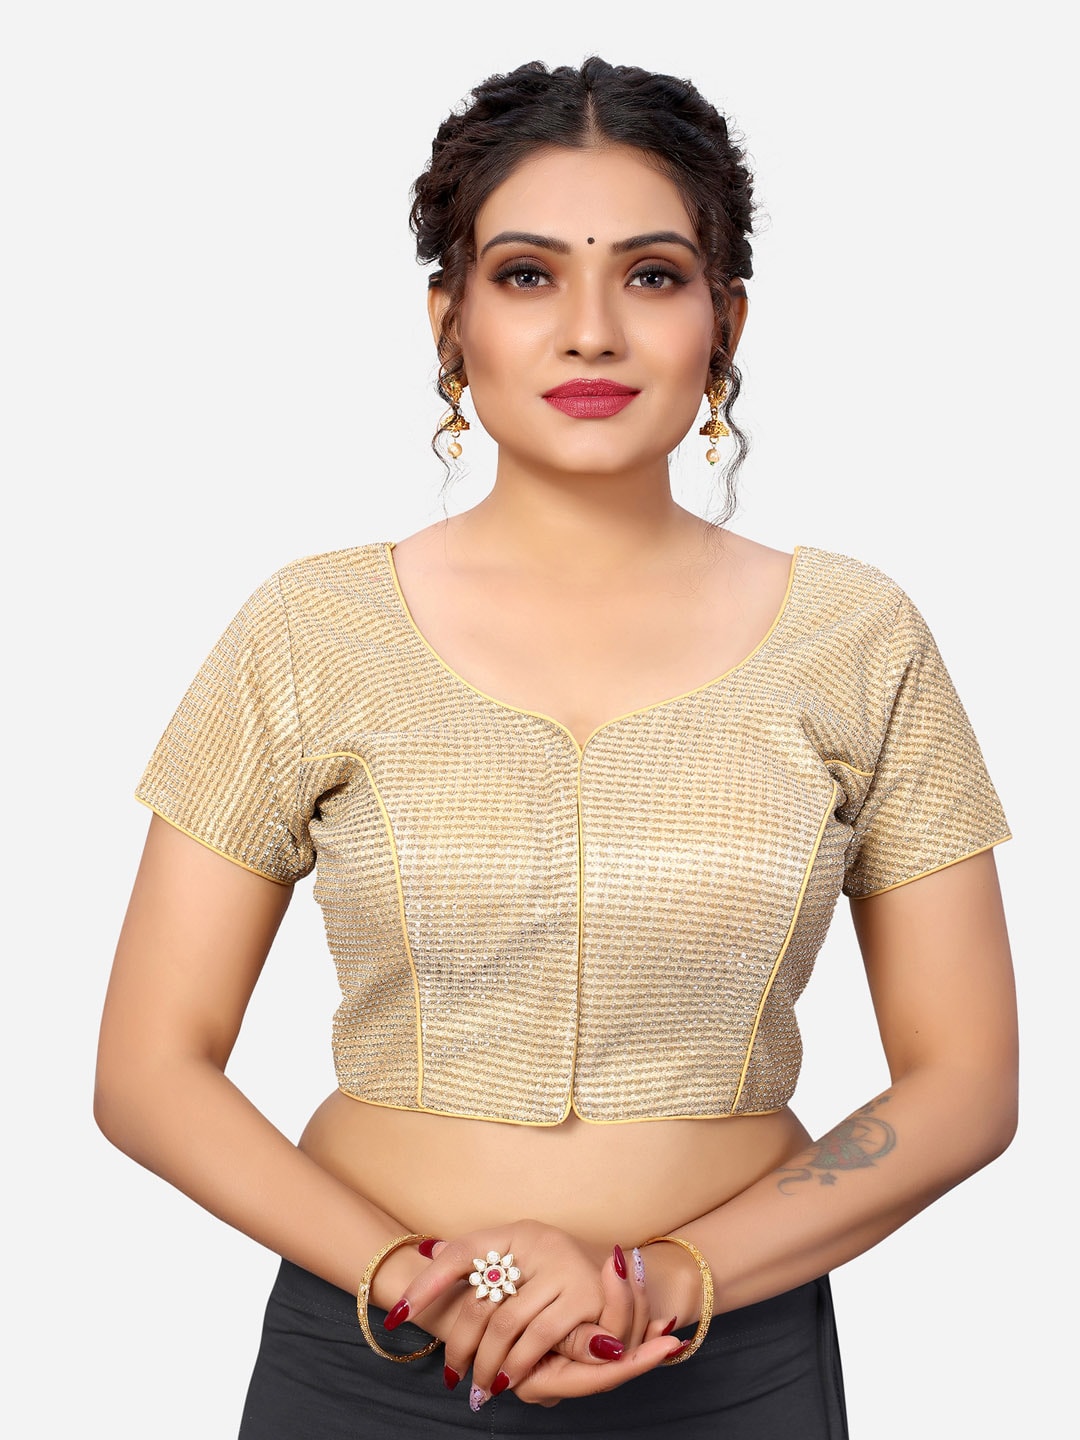 SIRIL Women Golden Woven Design Padded Saree Blouse Price in India